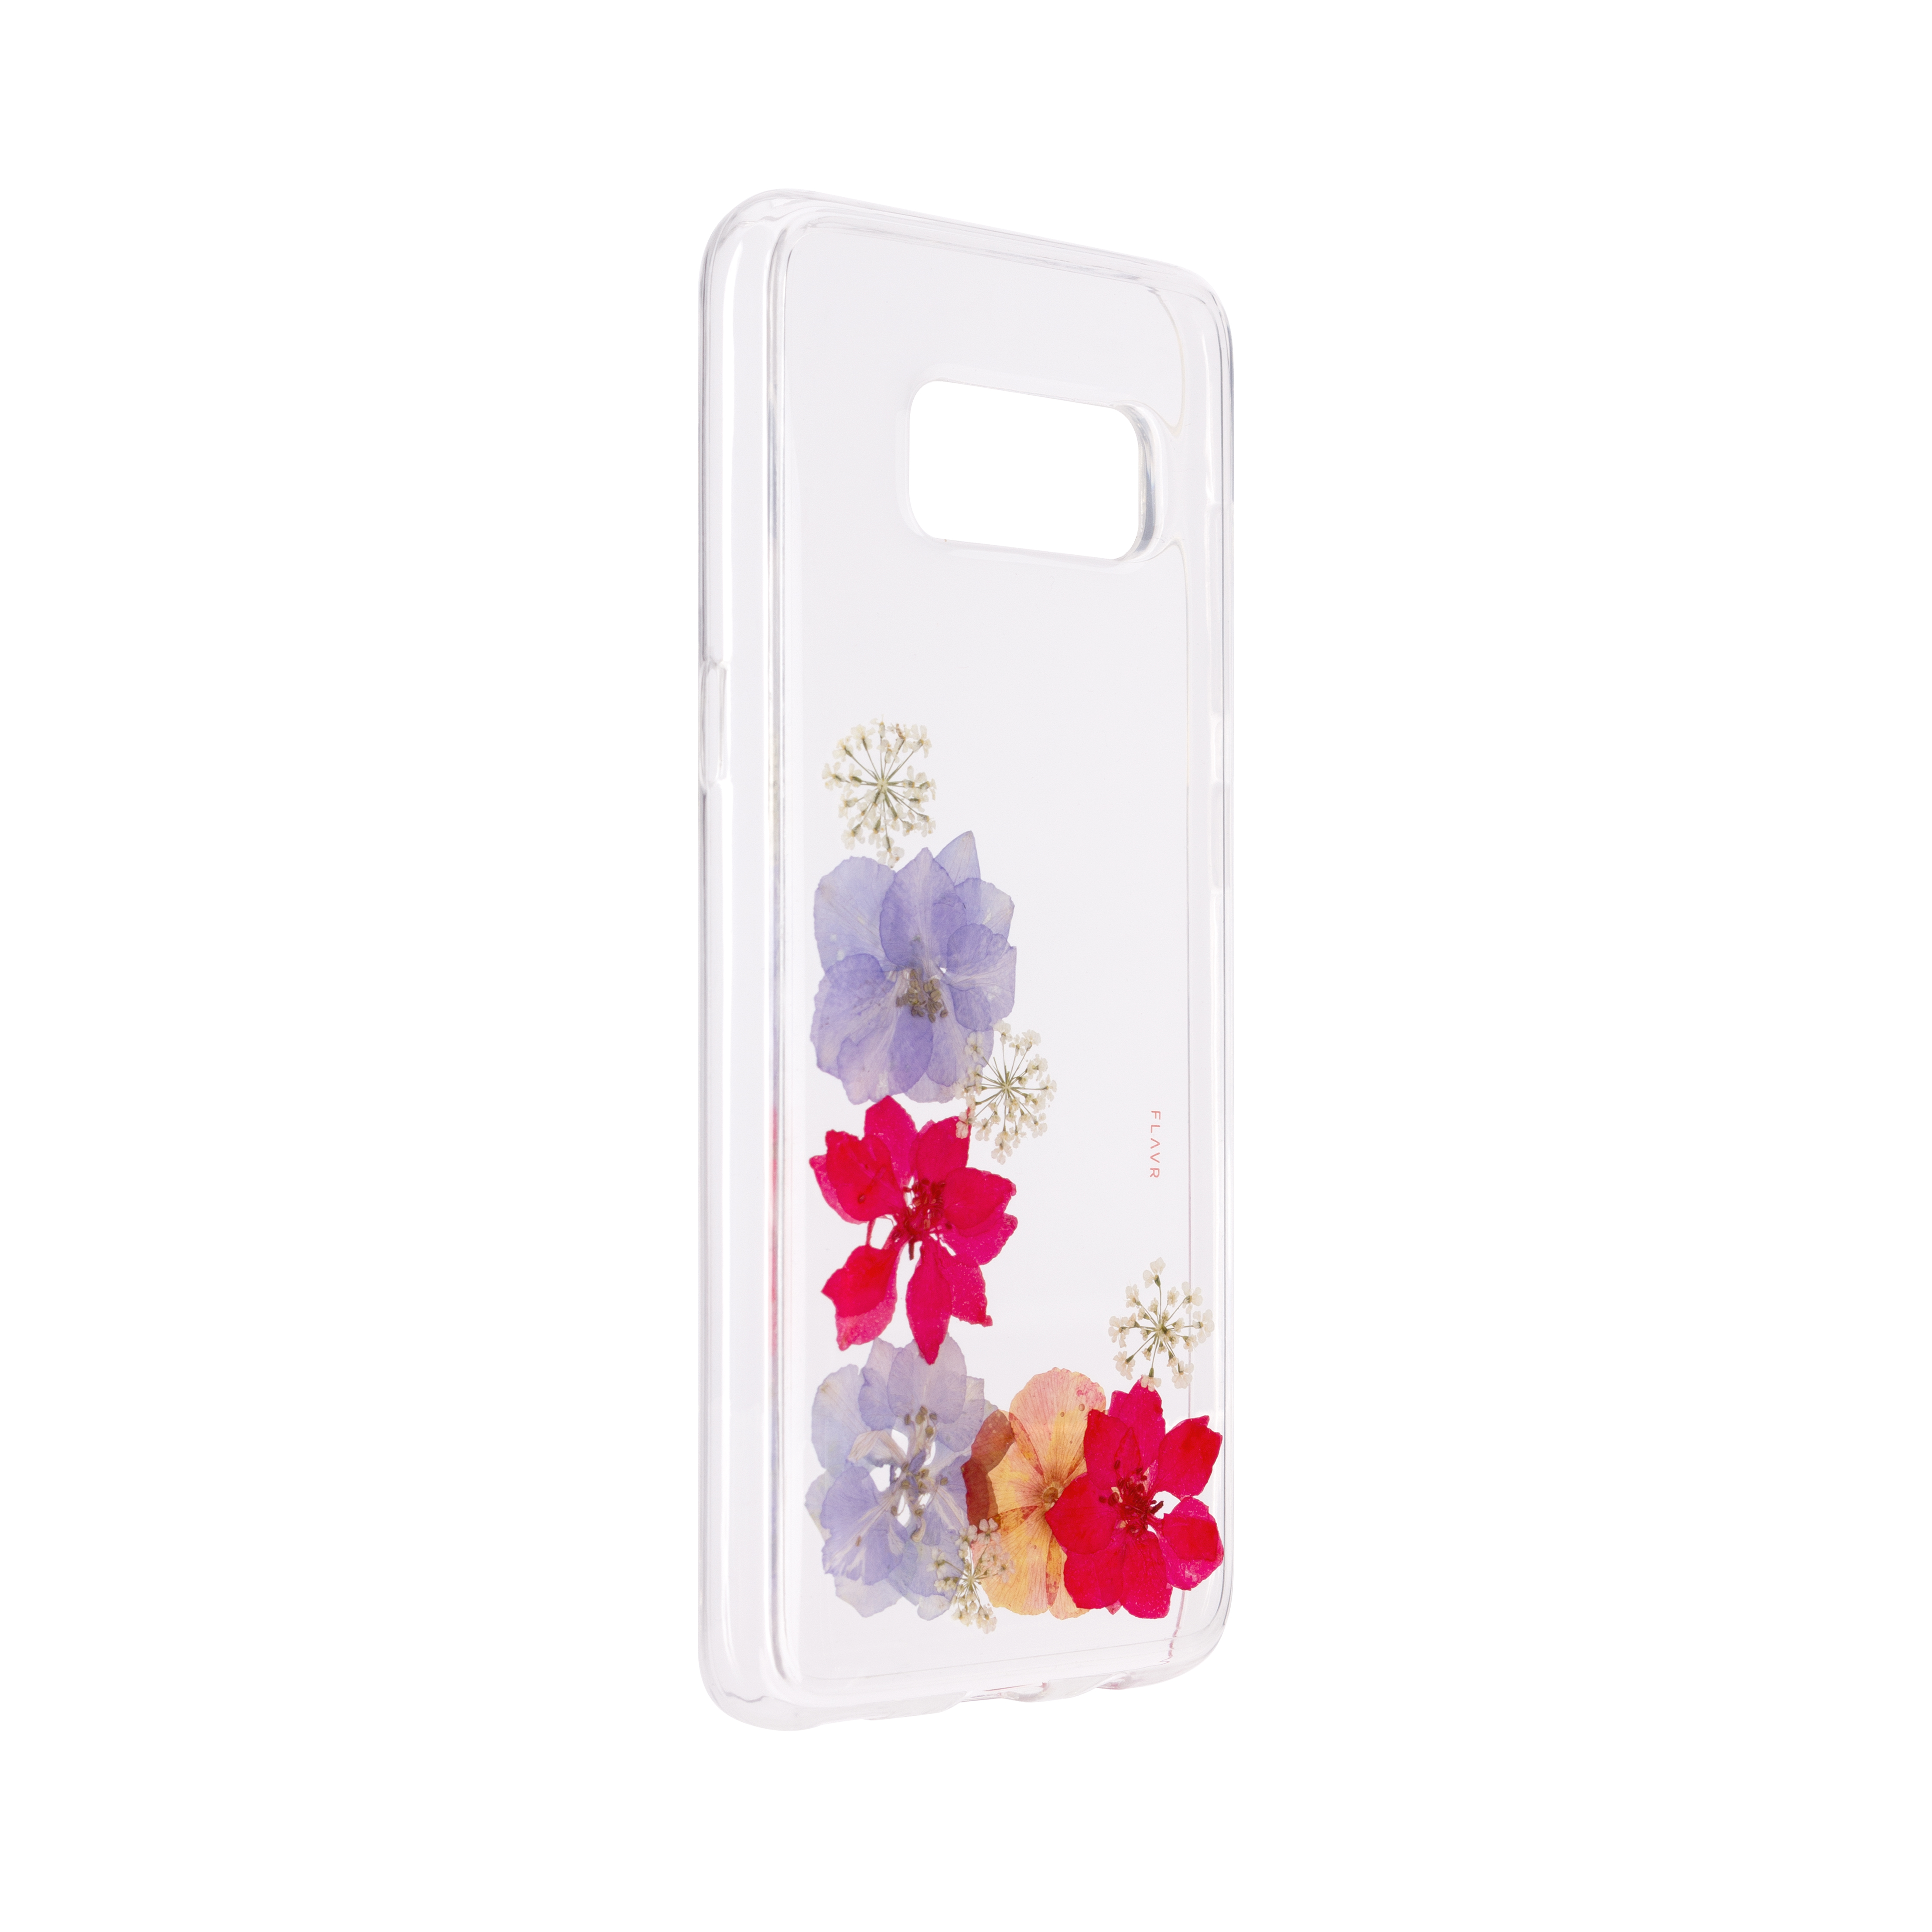 S8, COLOURFUL iPlate GALAXY Amelia, Real SAMSUNG, Backcover, FLAVR Flower